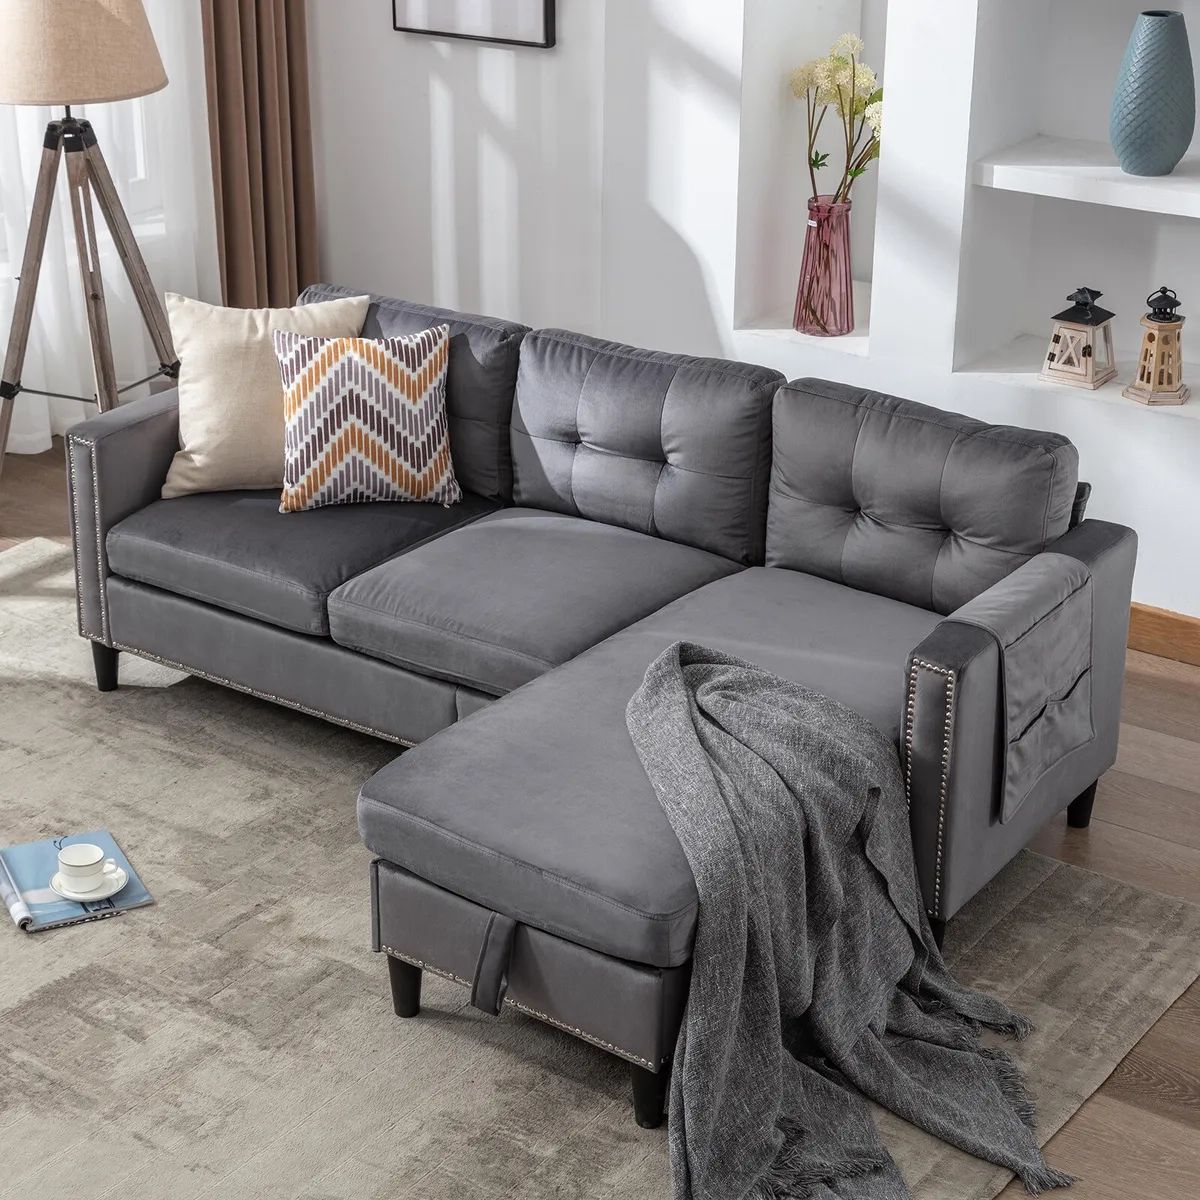 Gray Velvet L Shape Convertible Sofa Couch Reversible Chaise With Storage,  Usb | Ebay In L Shape Couches With Reversible Chaises (View 14 of 15)